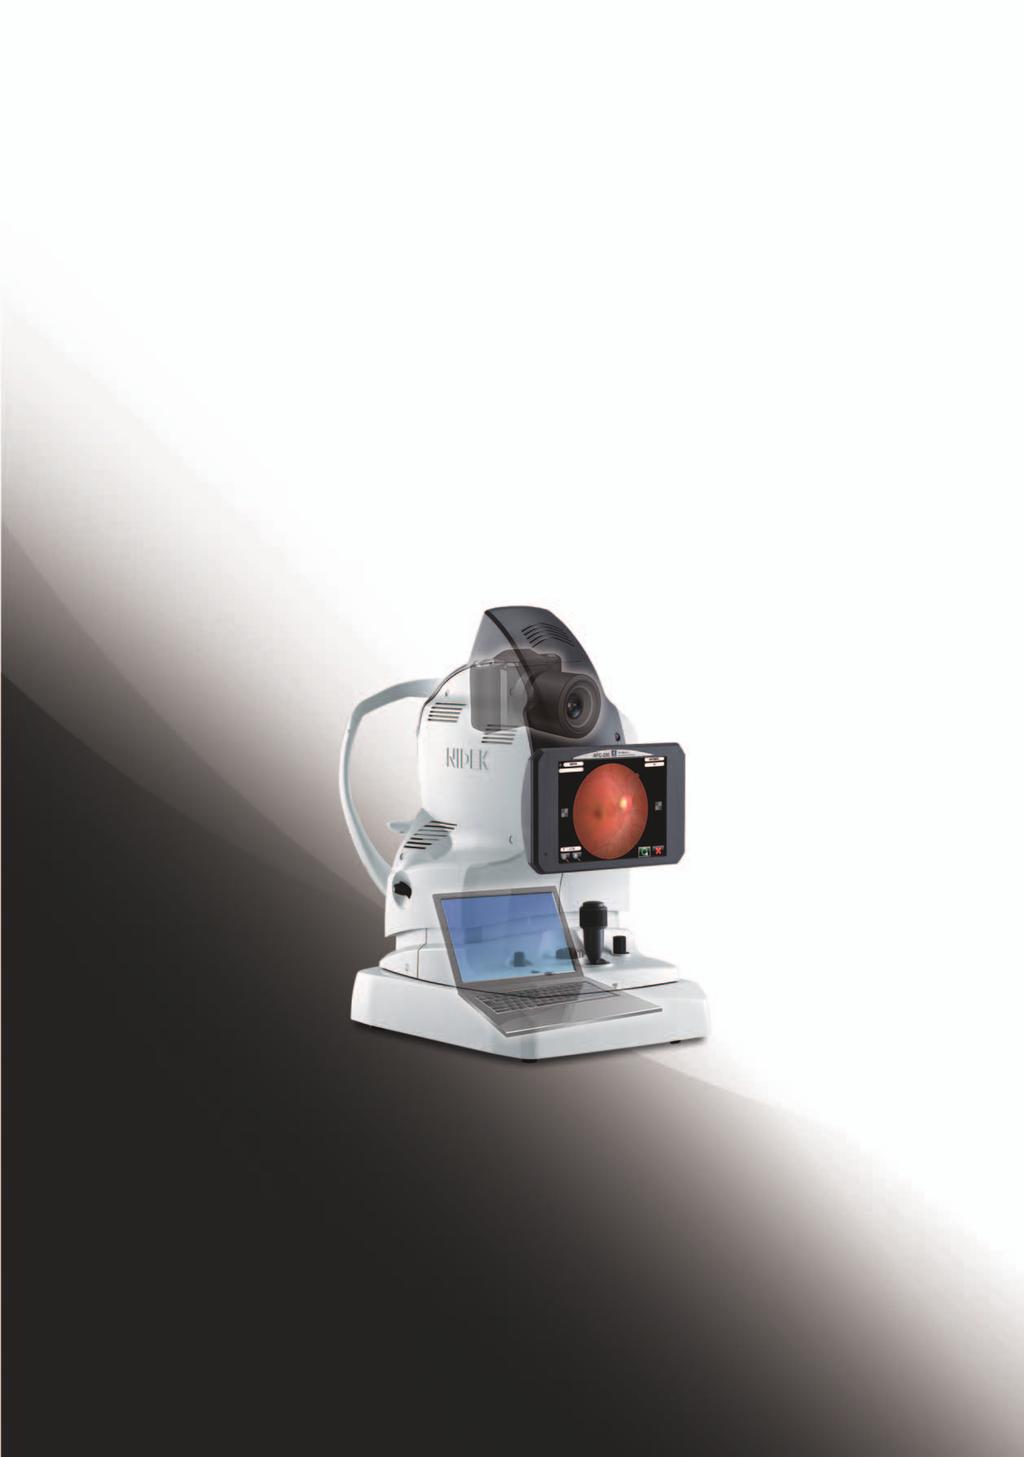 The Smart Fundus Camera What is the smart fundus camera? It is a camera that is sophisticated, technologically advanced, and user-friendly. The AFC-330 speaks for itself.